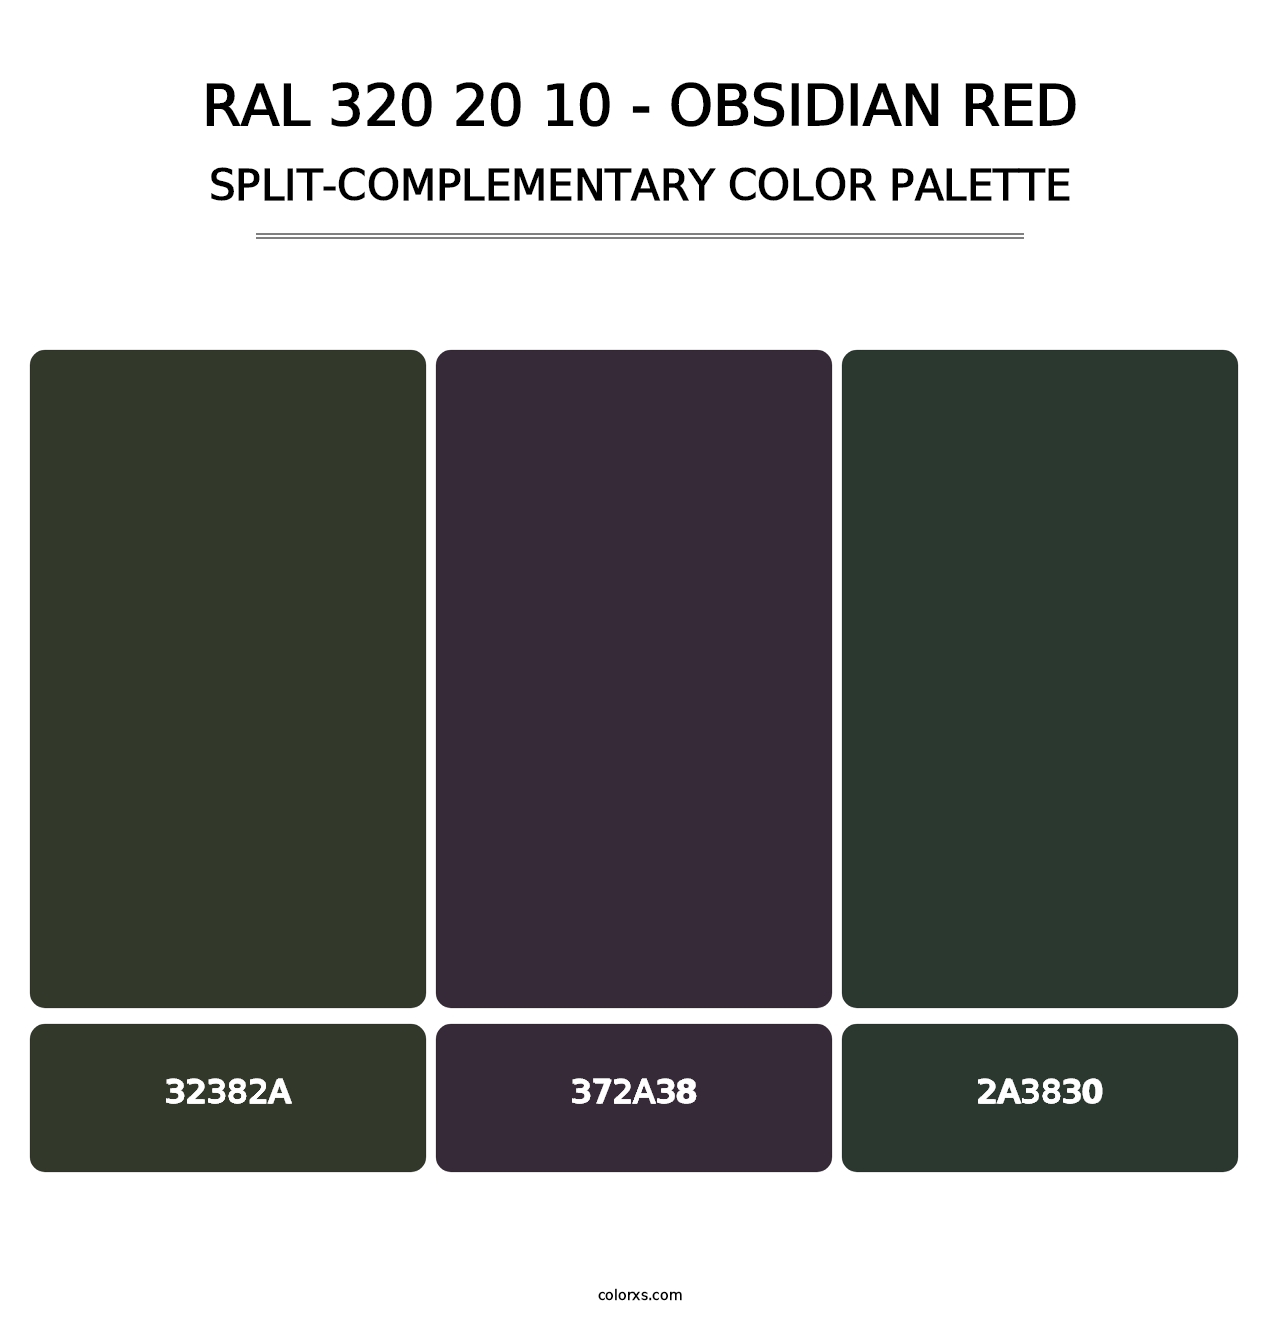 RAL 320 20 10 - Obsidian Red - Split-Complementary Color Palette